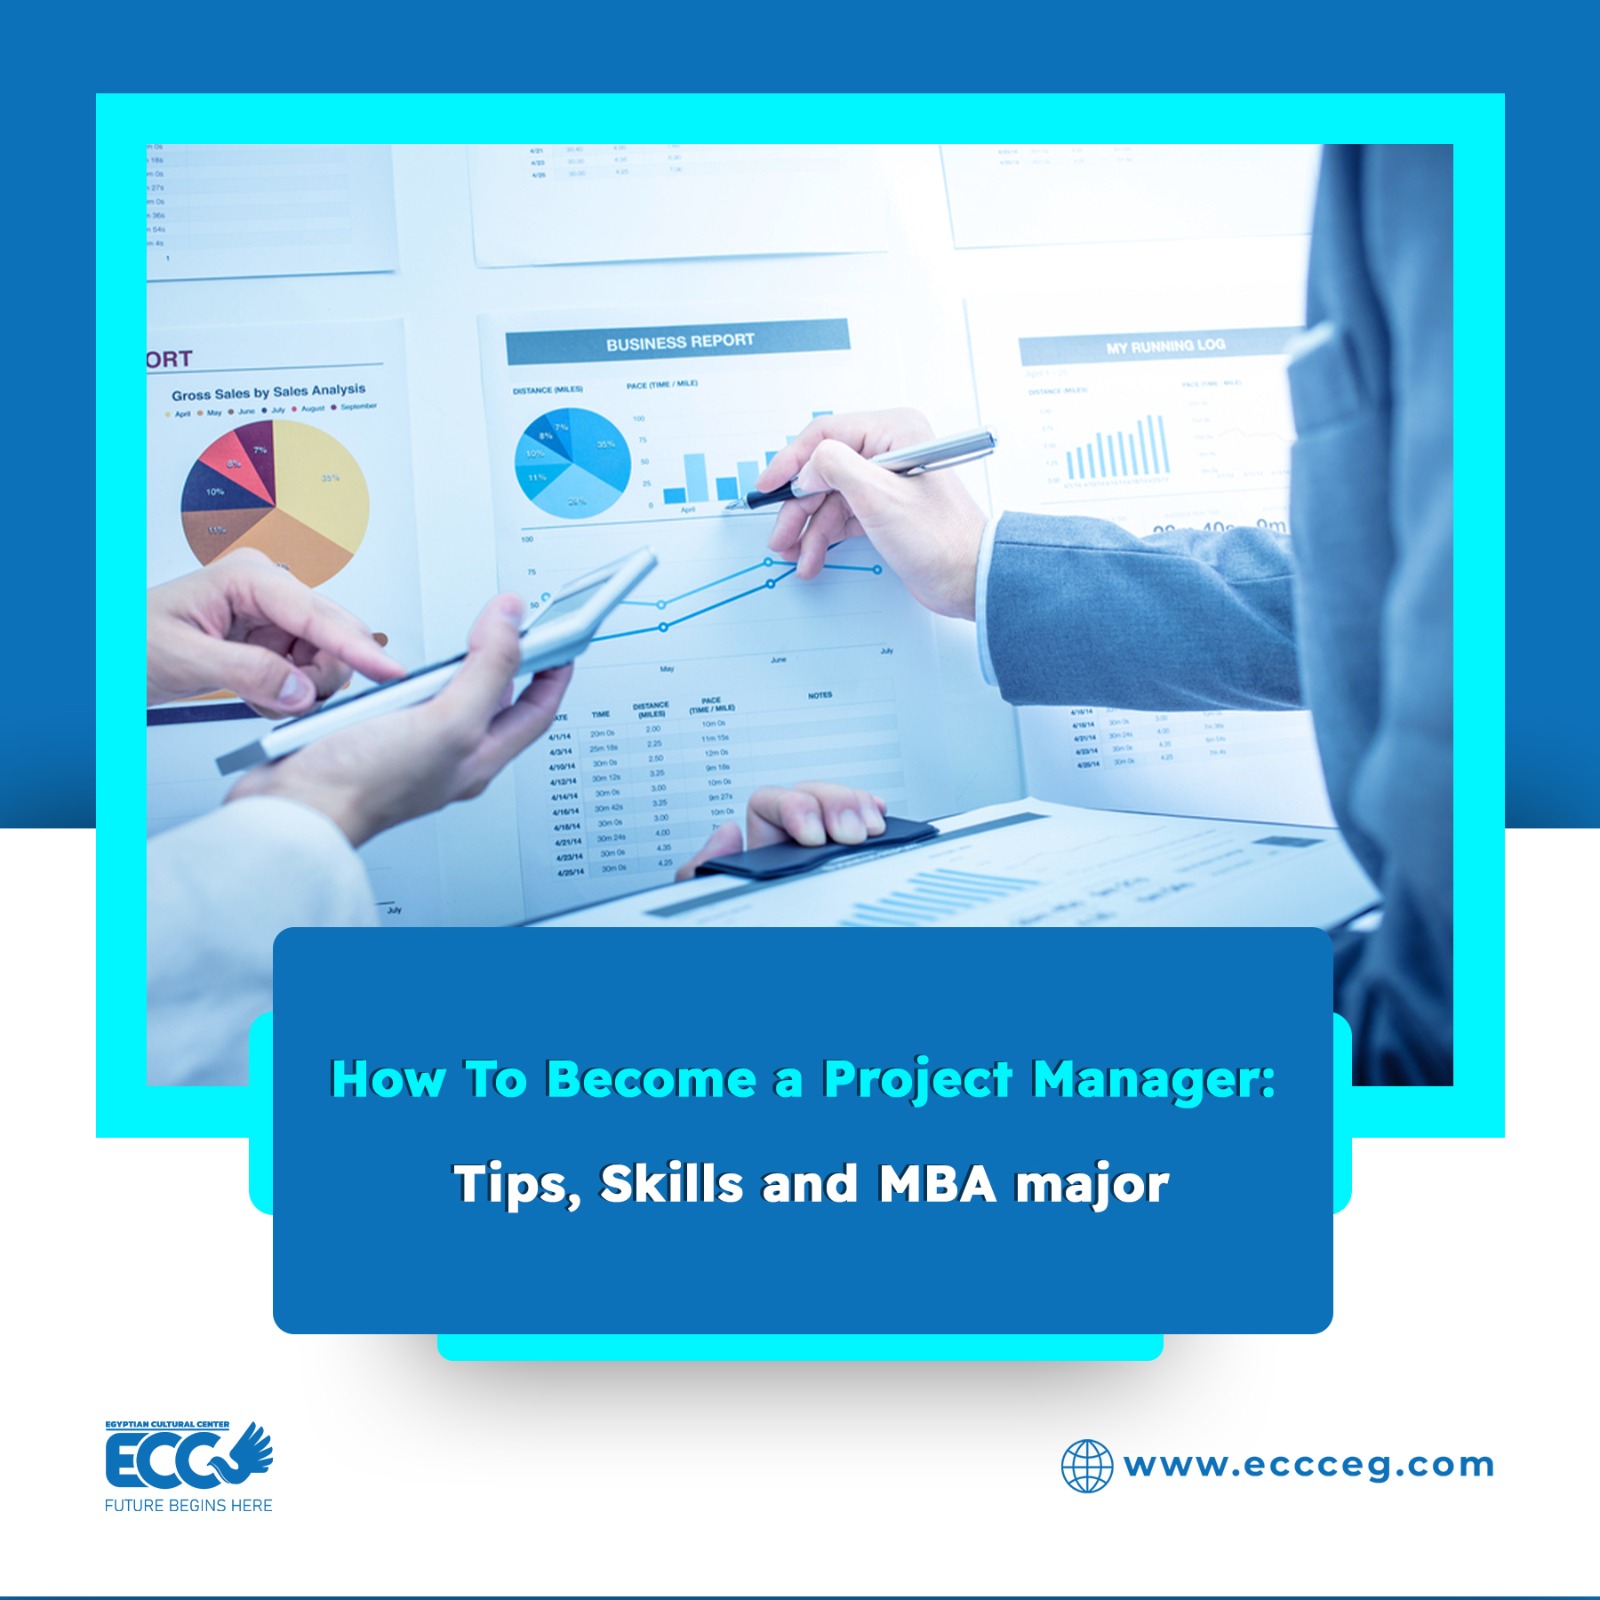 How To Become a Project Manager: Tips, Skills and MBA major